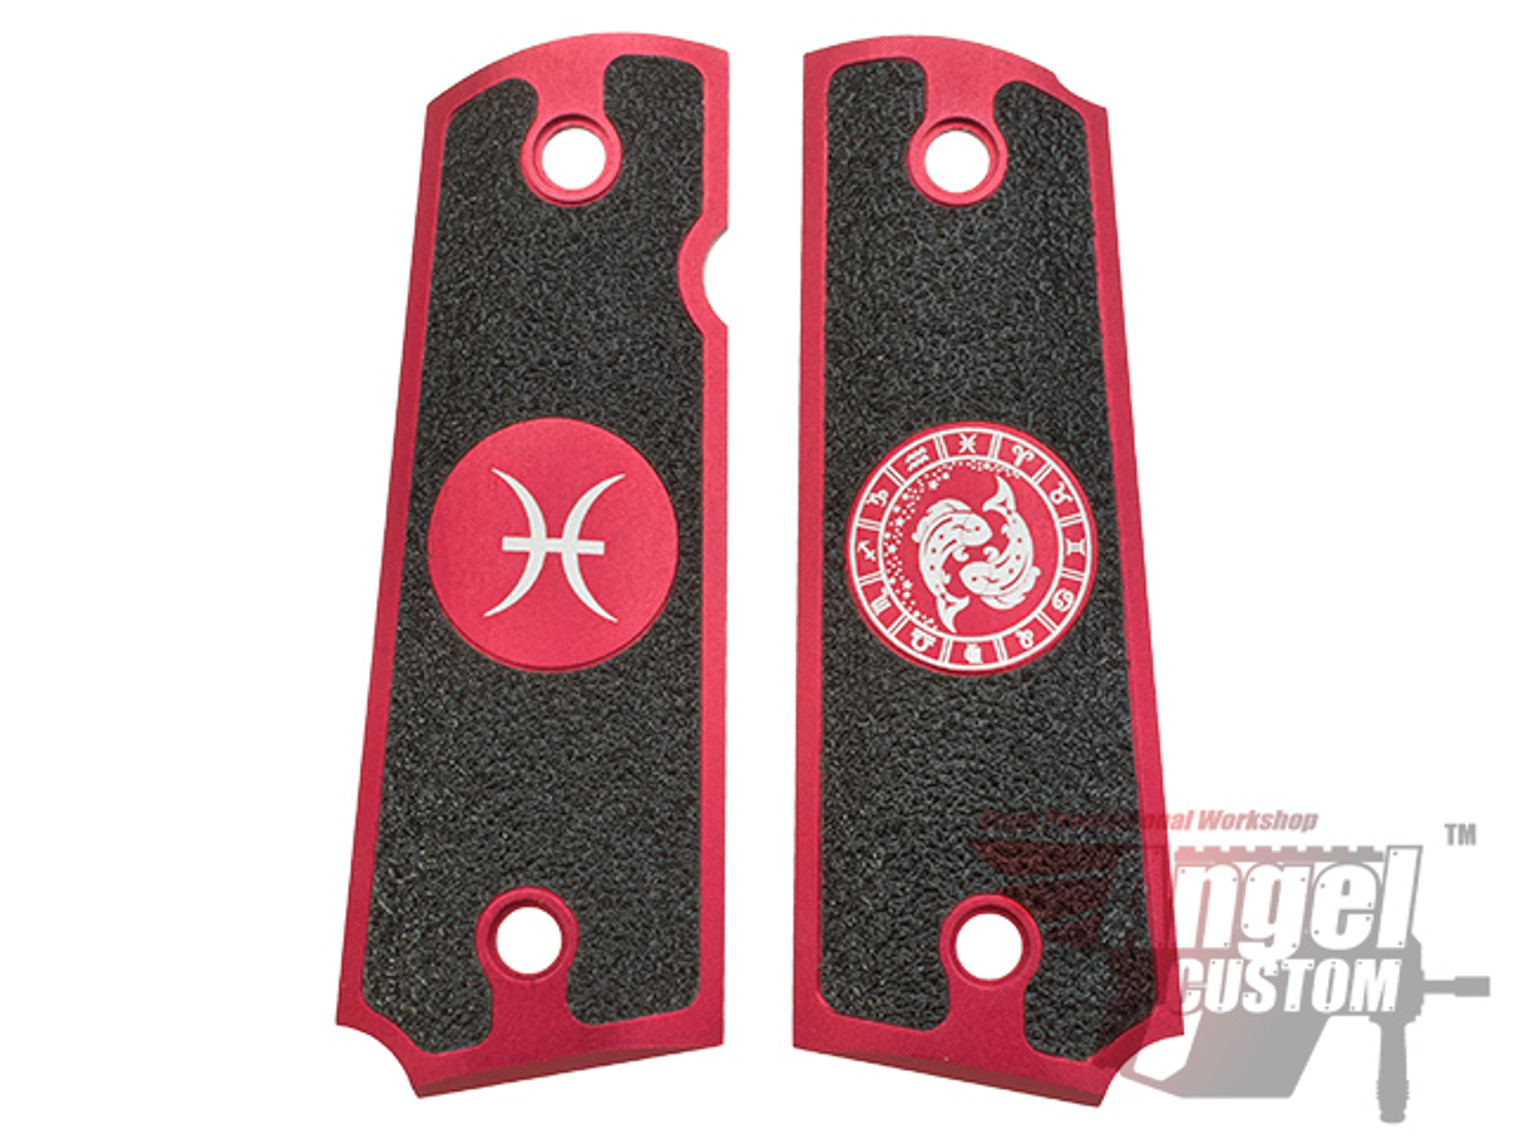 Angel Custom CNC Machined Tac-Glove "Zodiac" Grips for WE-Tech 1911 Series Airsoft Pistols - Pisces (Red)